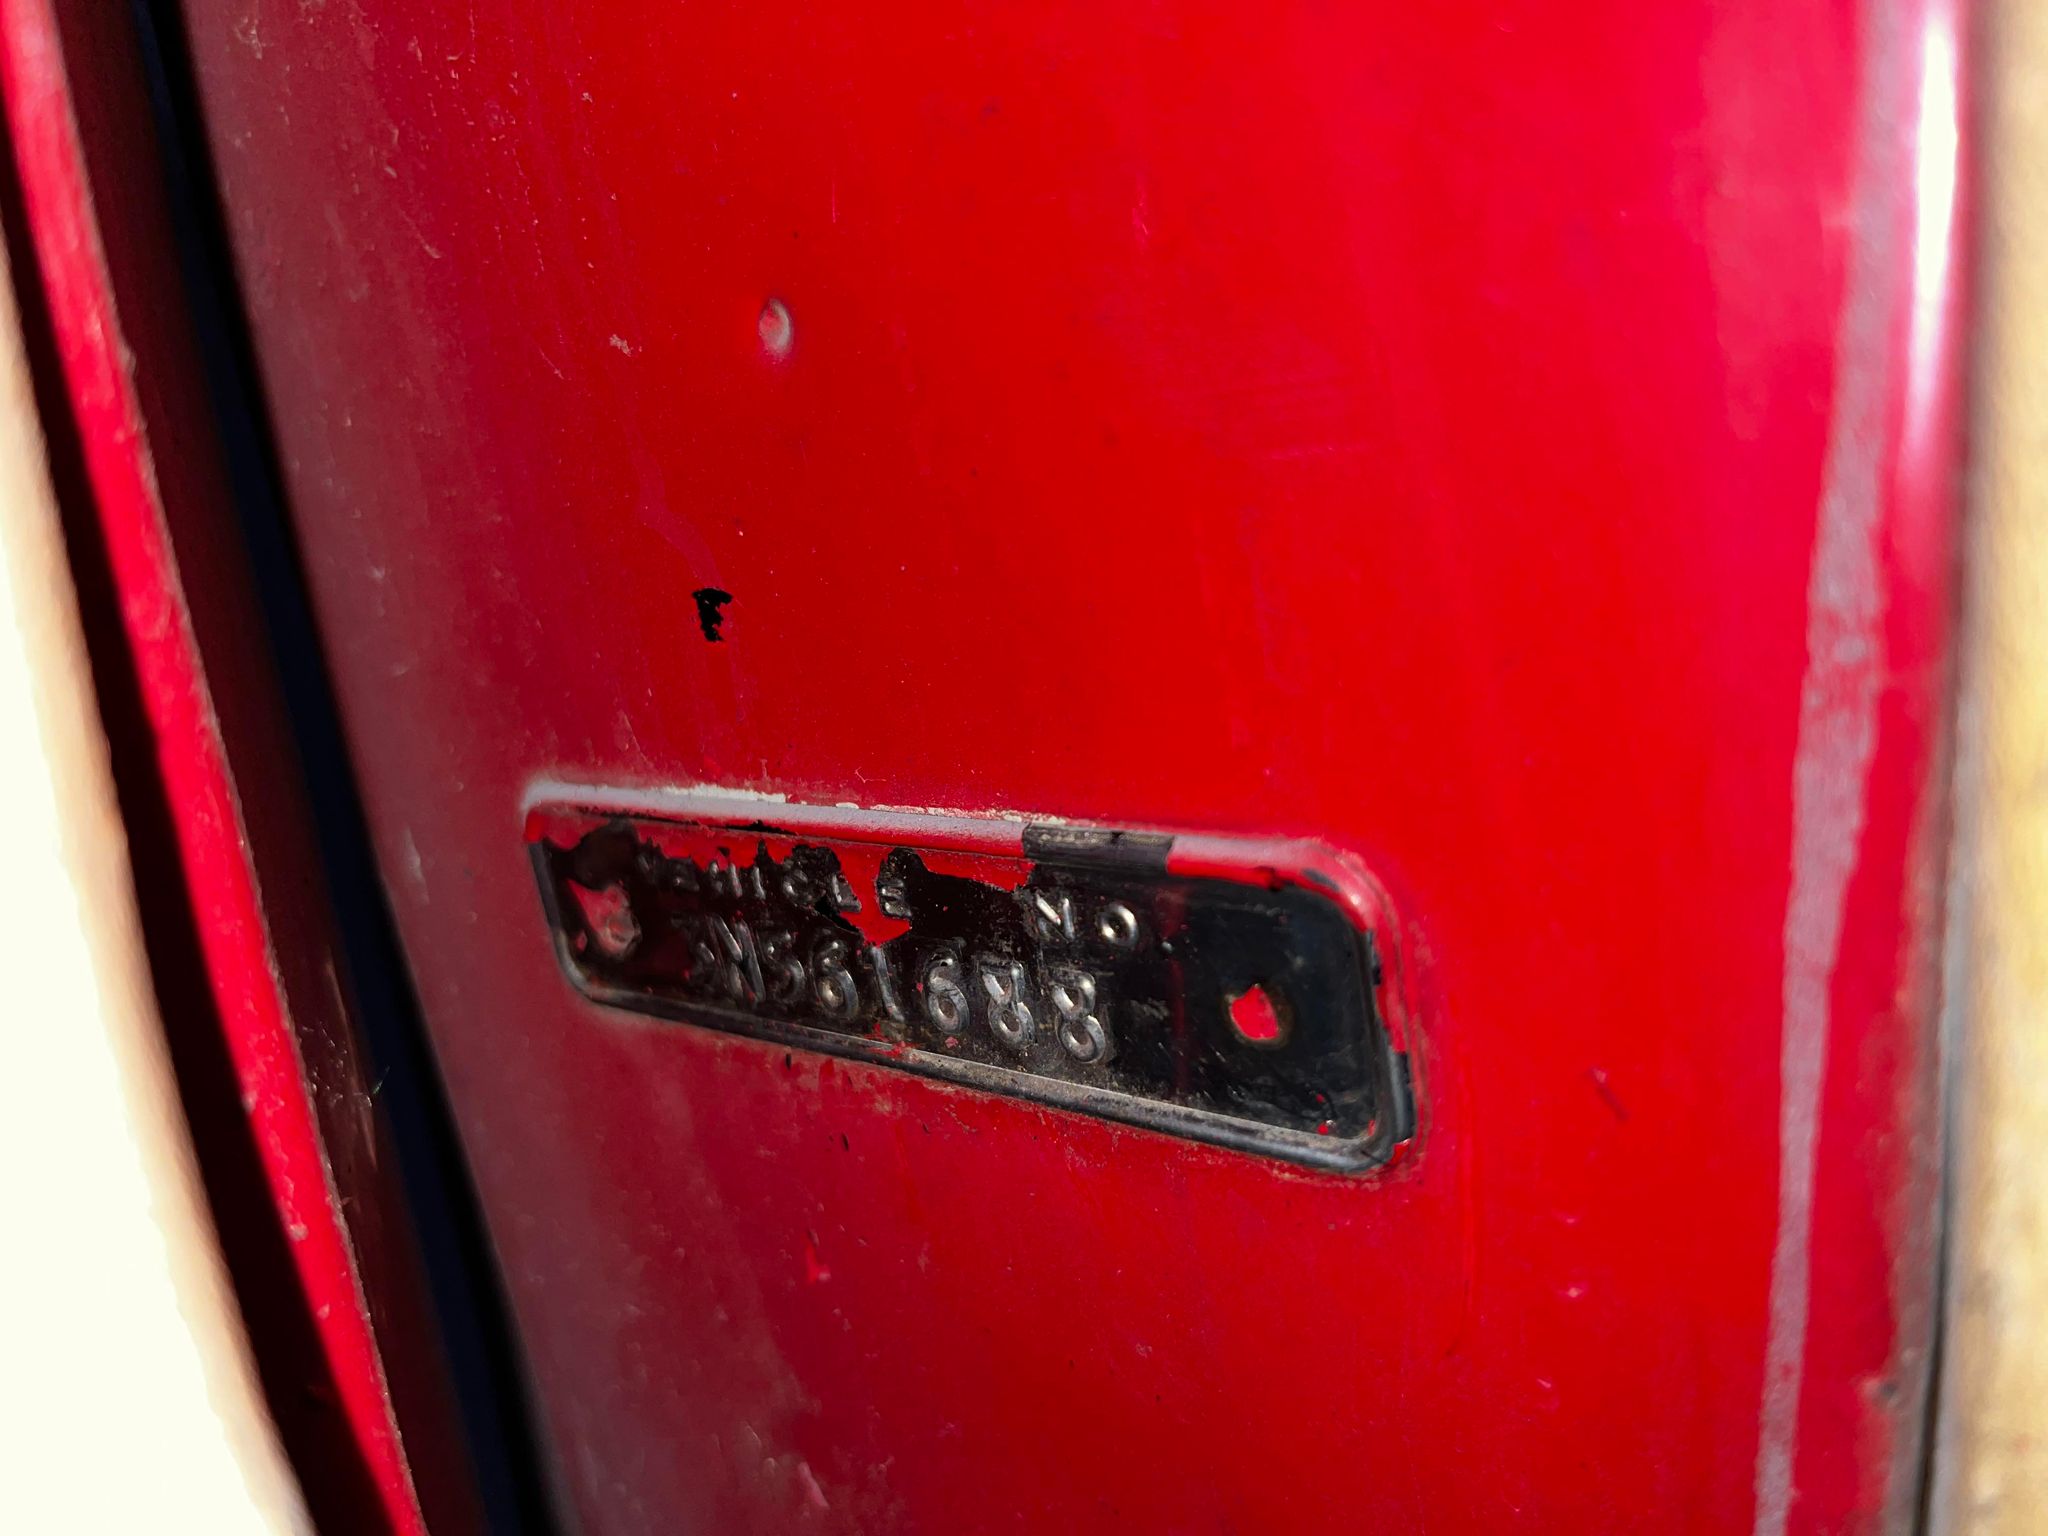 A close-up of a red mailbox

Description automatically generated